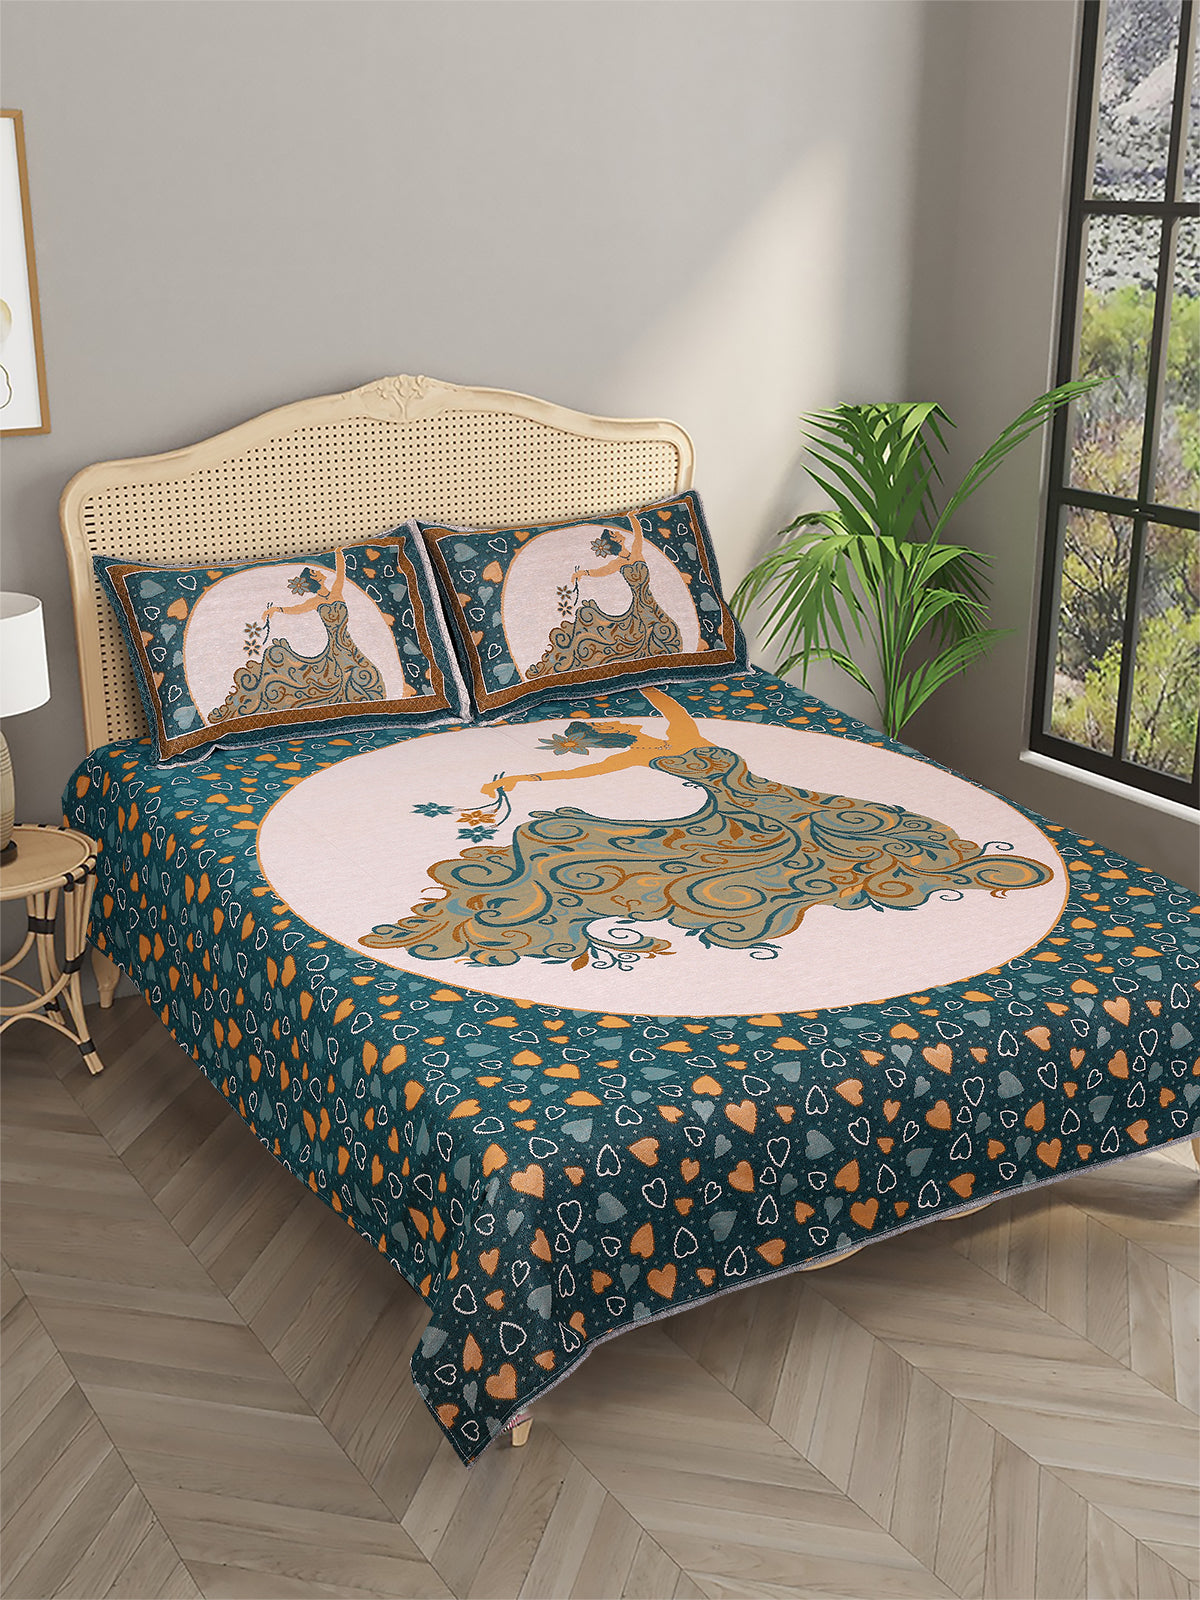 Teal & Beige Self-Designed Patterned Reversible Double Bed Cover With 2 Pillow Covers